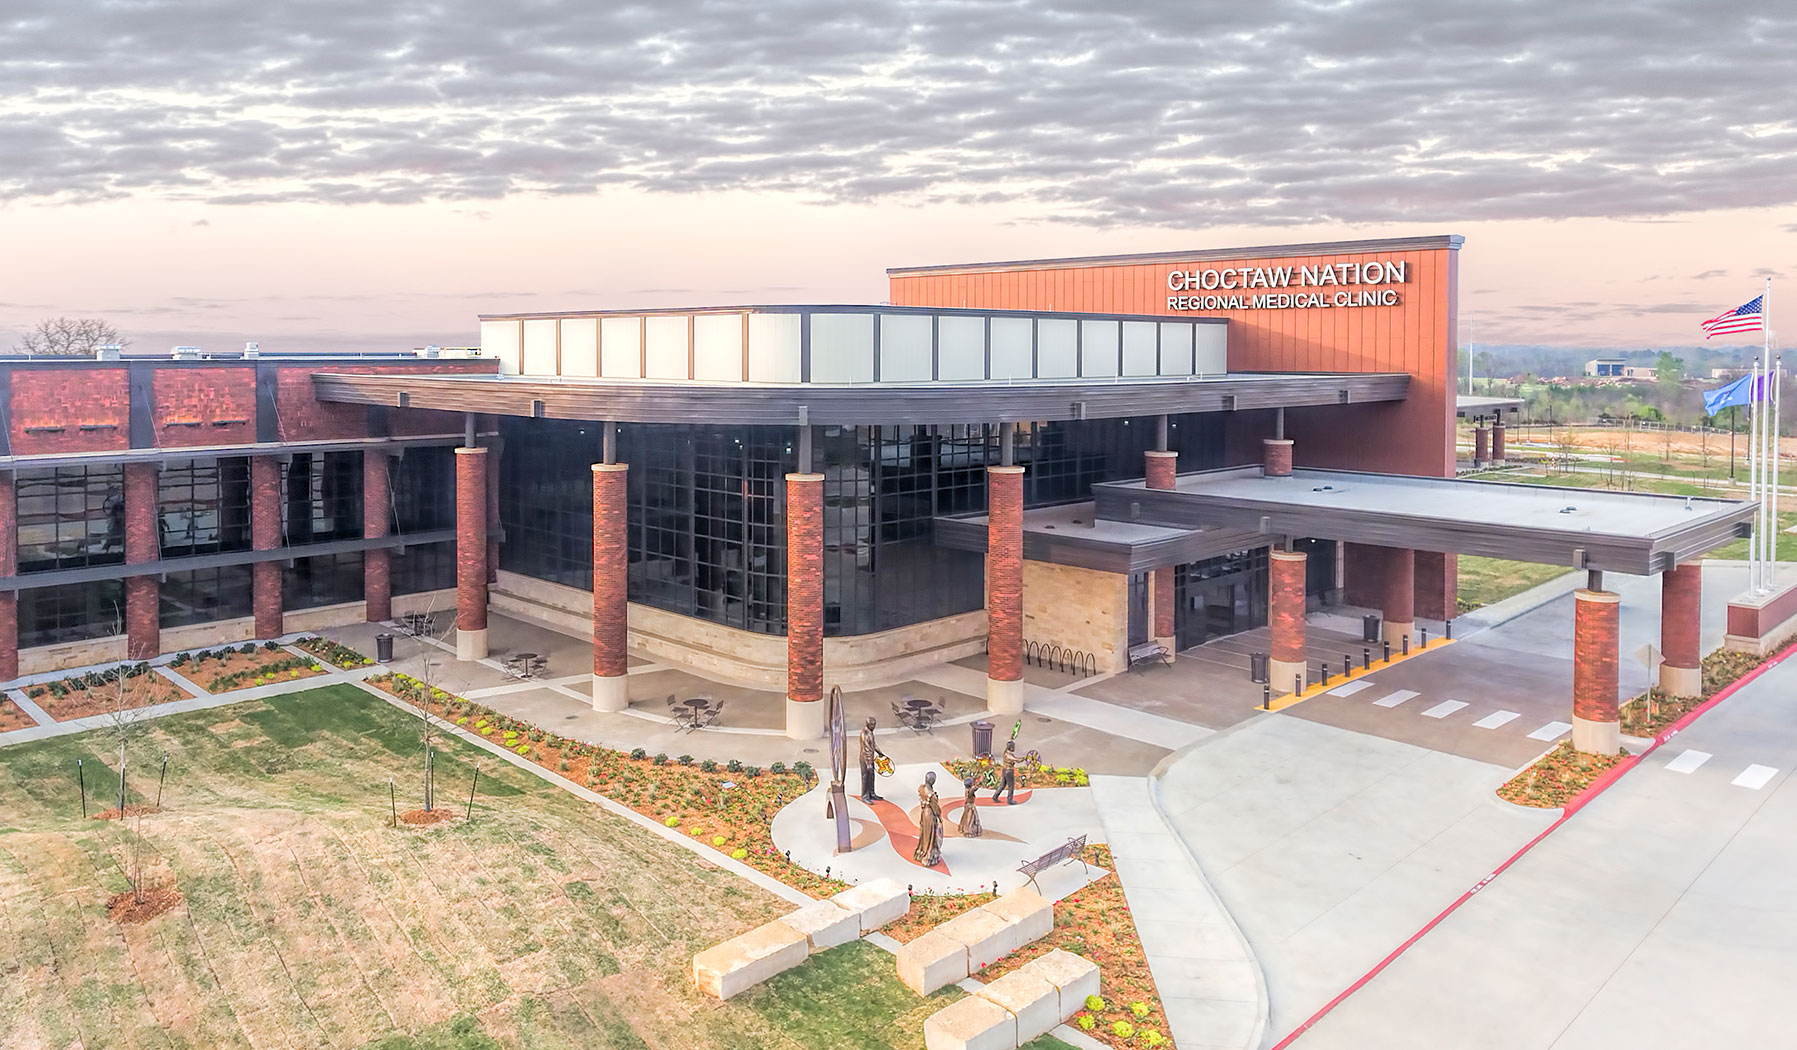 New Medical Clinic Pays Tribute To Native Indian Tribes Culture Health Facilities Management